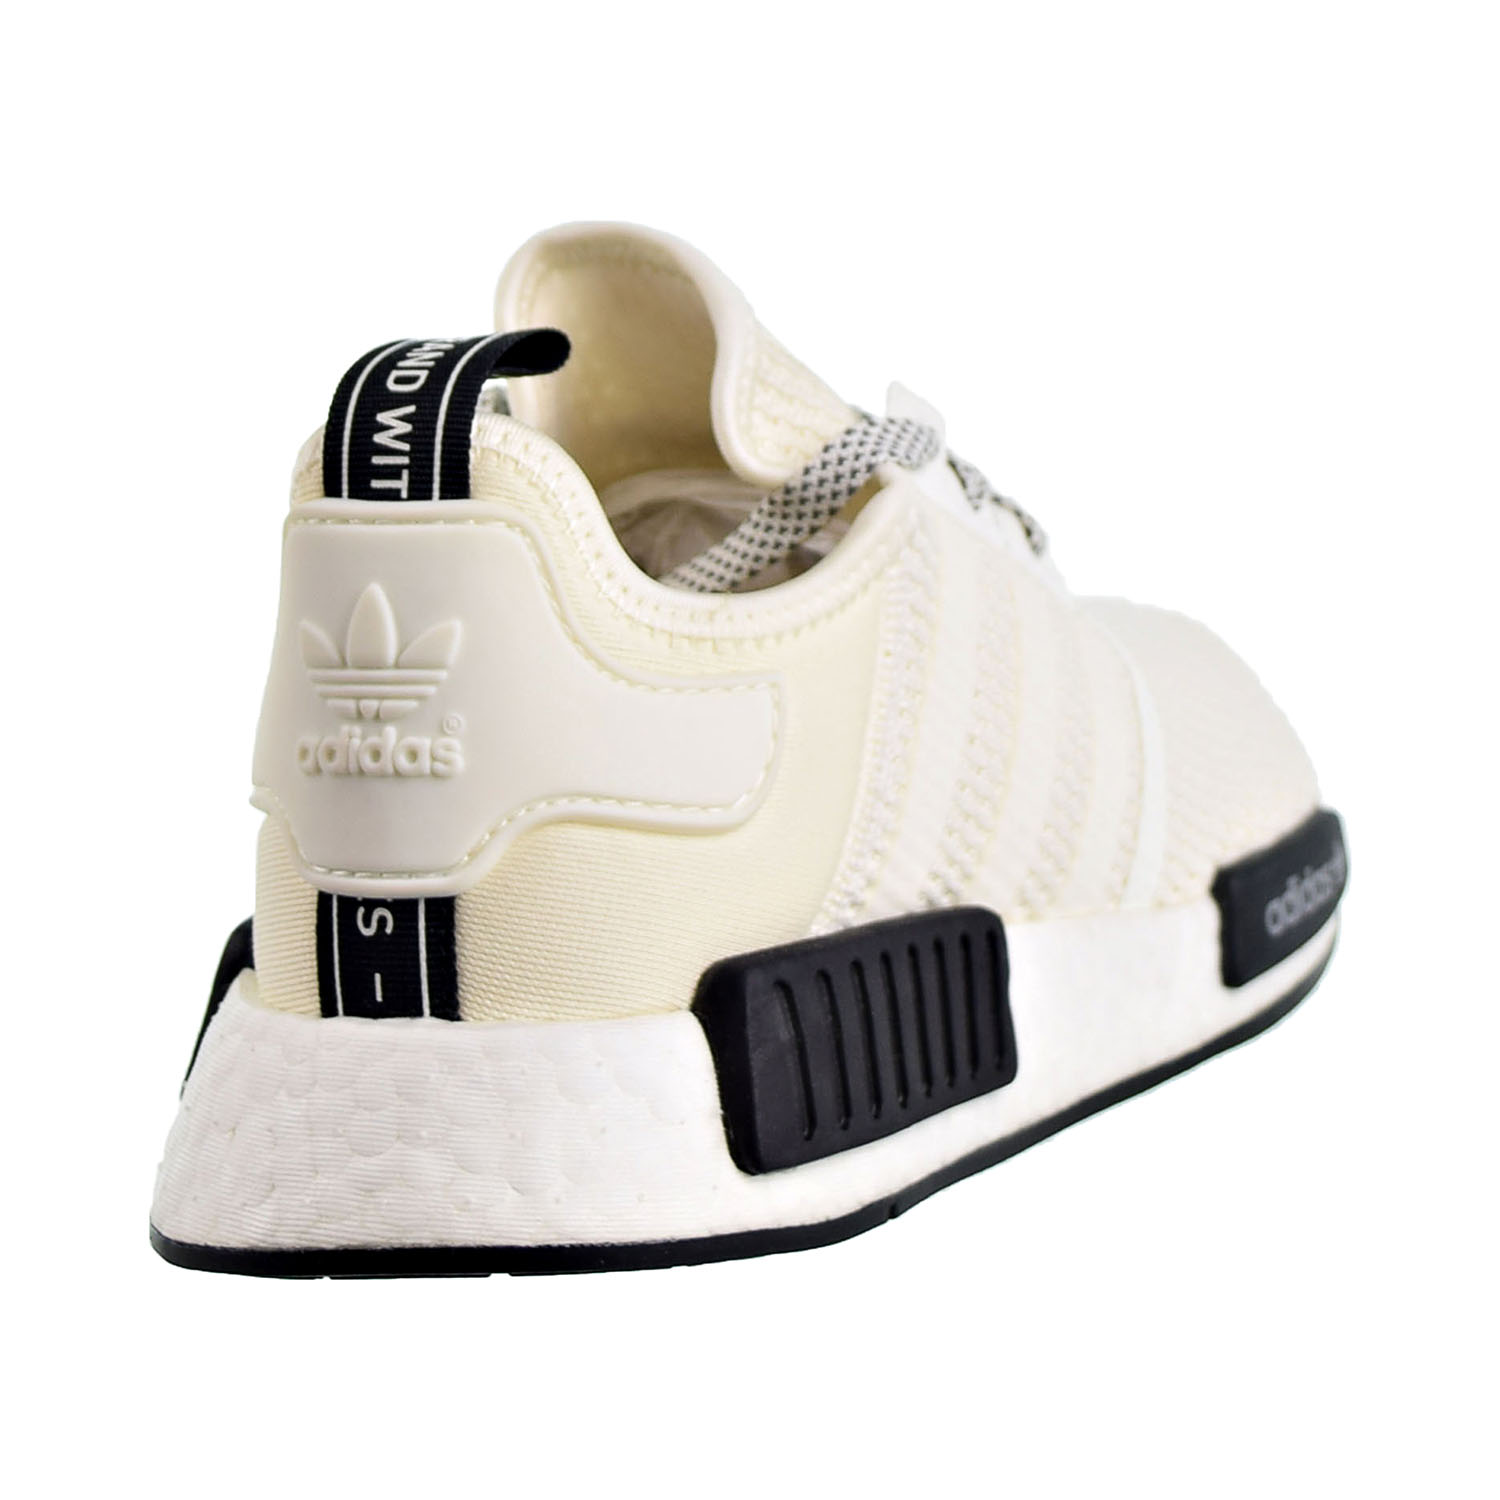 nmd off white carbon core black